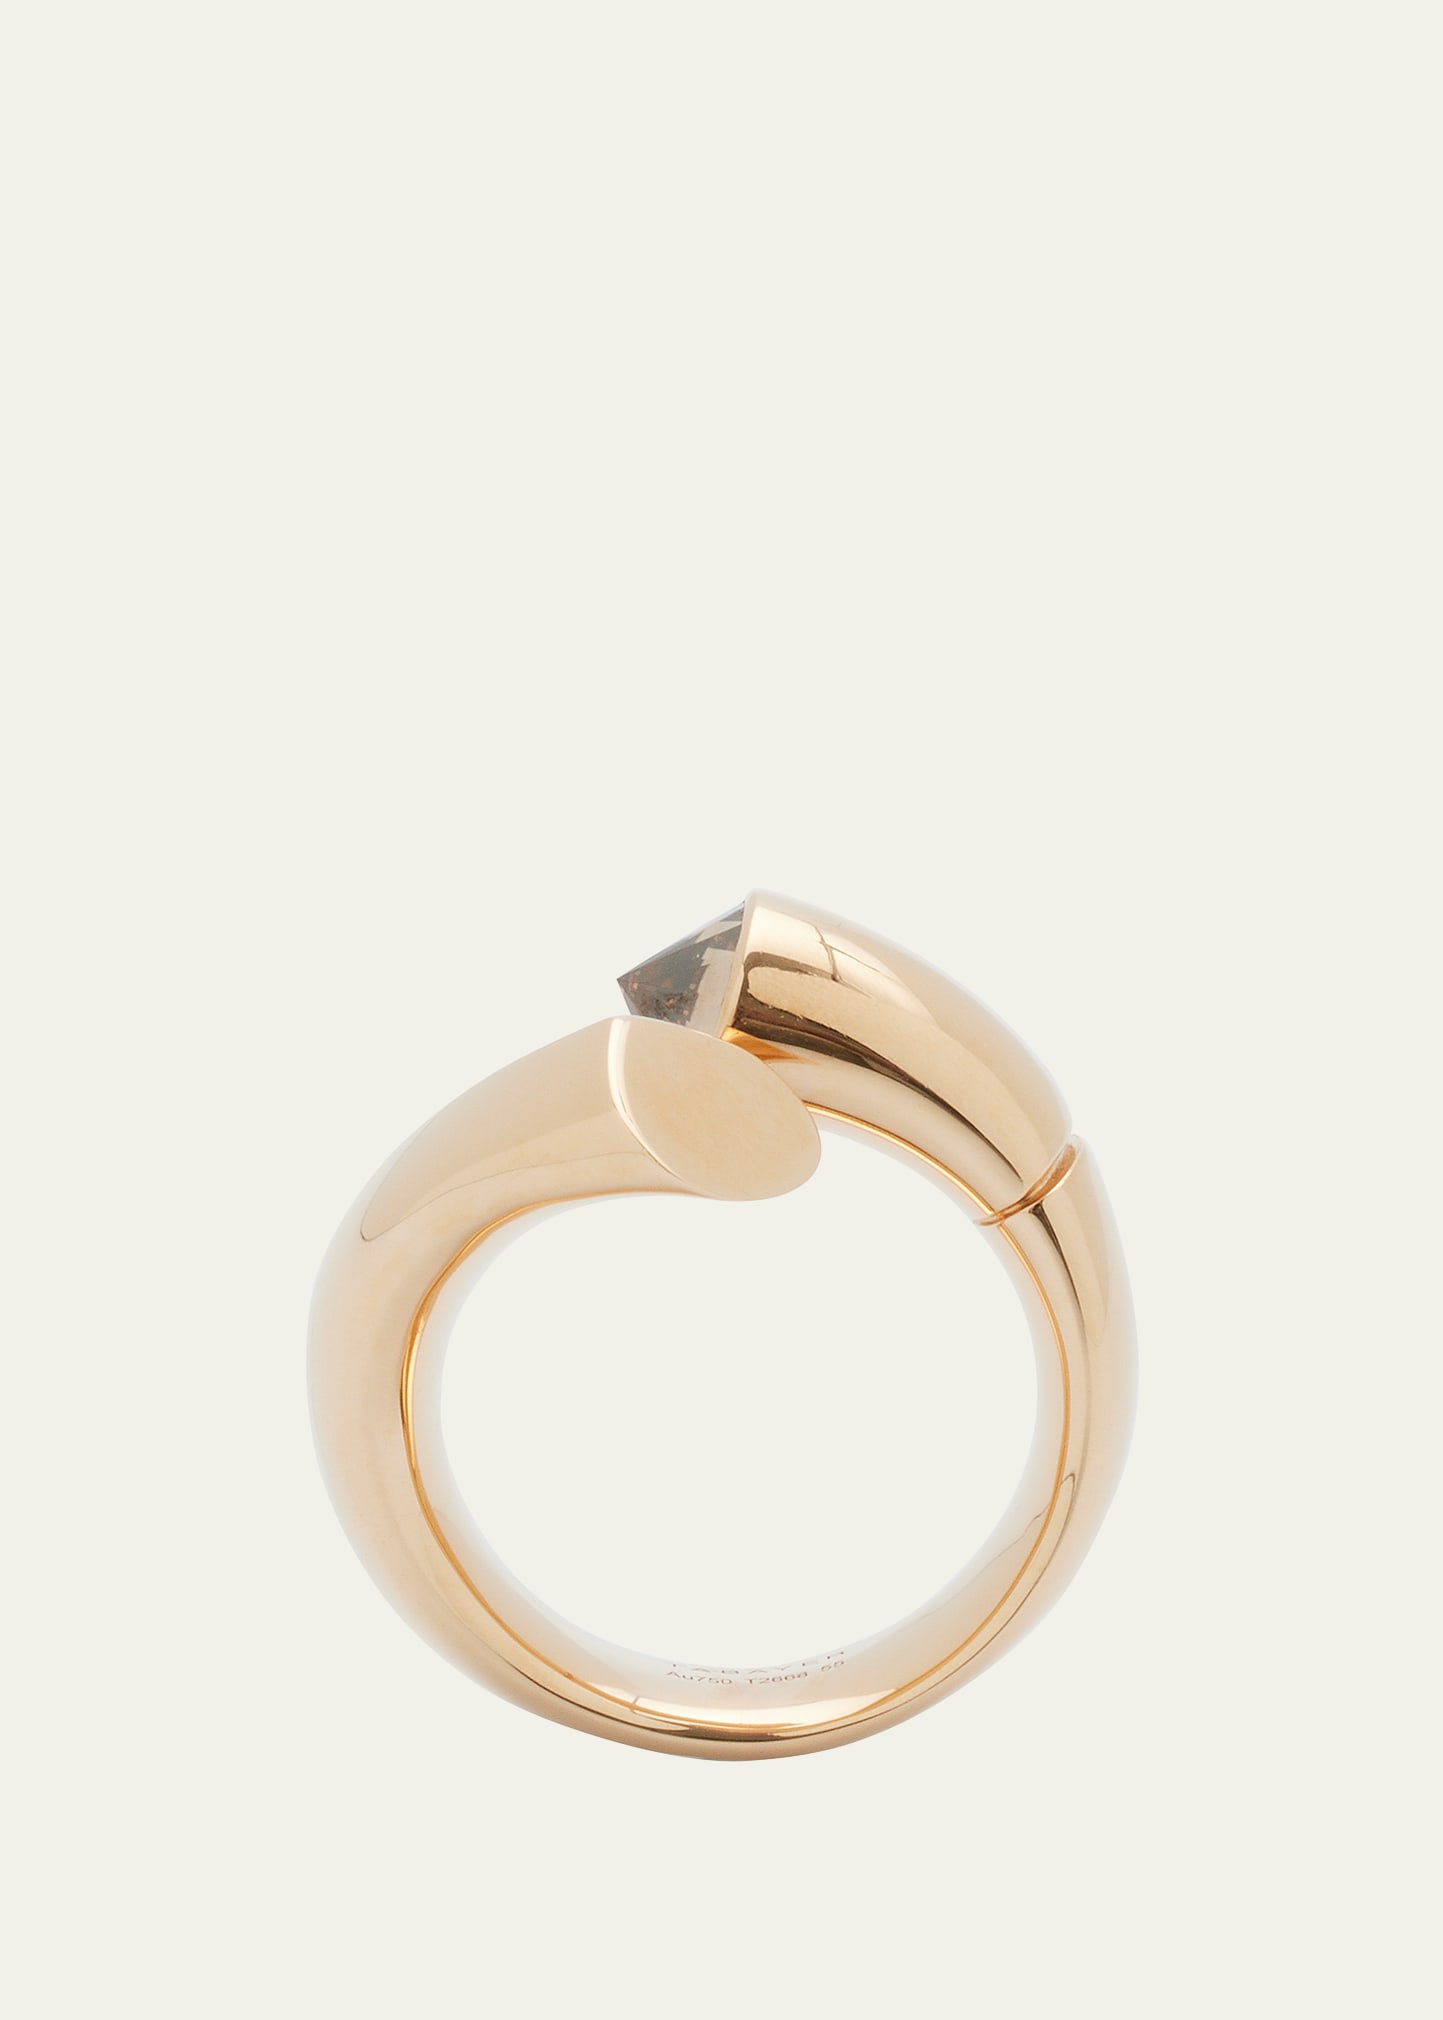 18k Fairmined Rose Gold Large Oera Ring with Diamond, Size 55